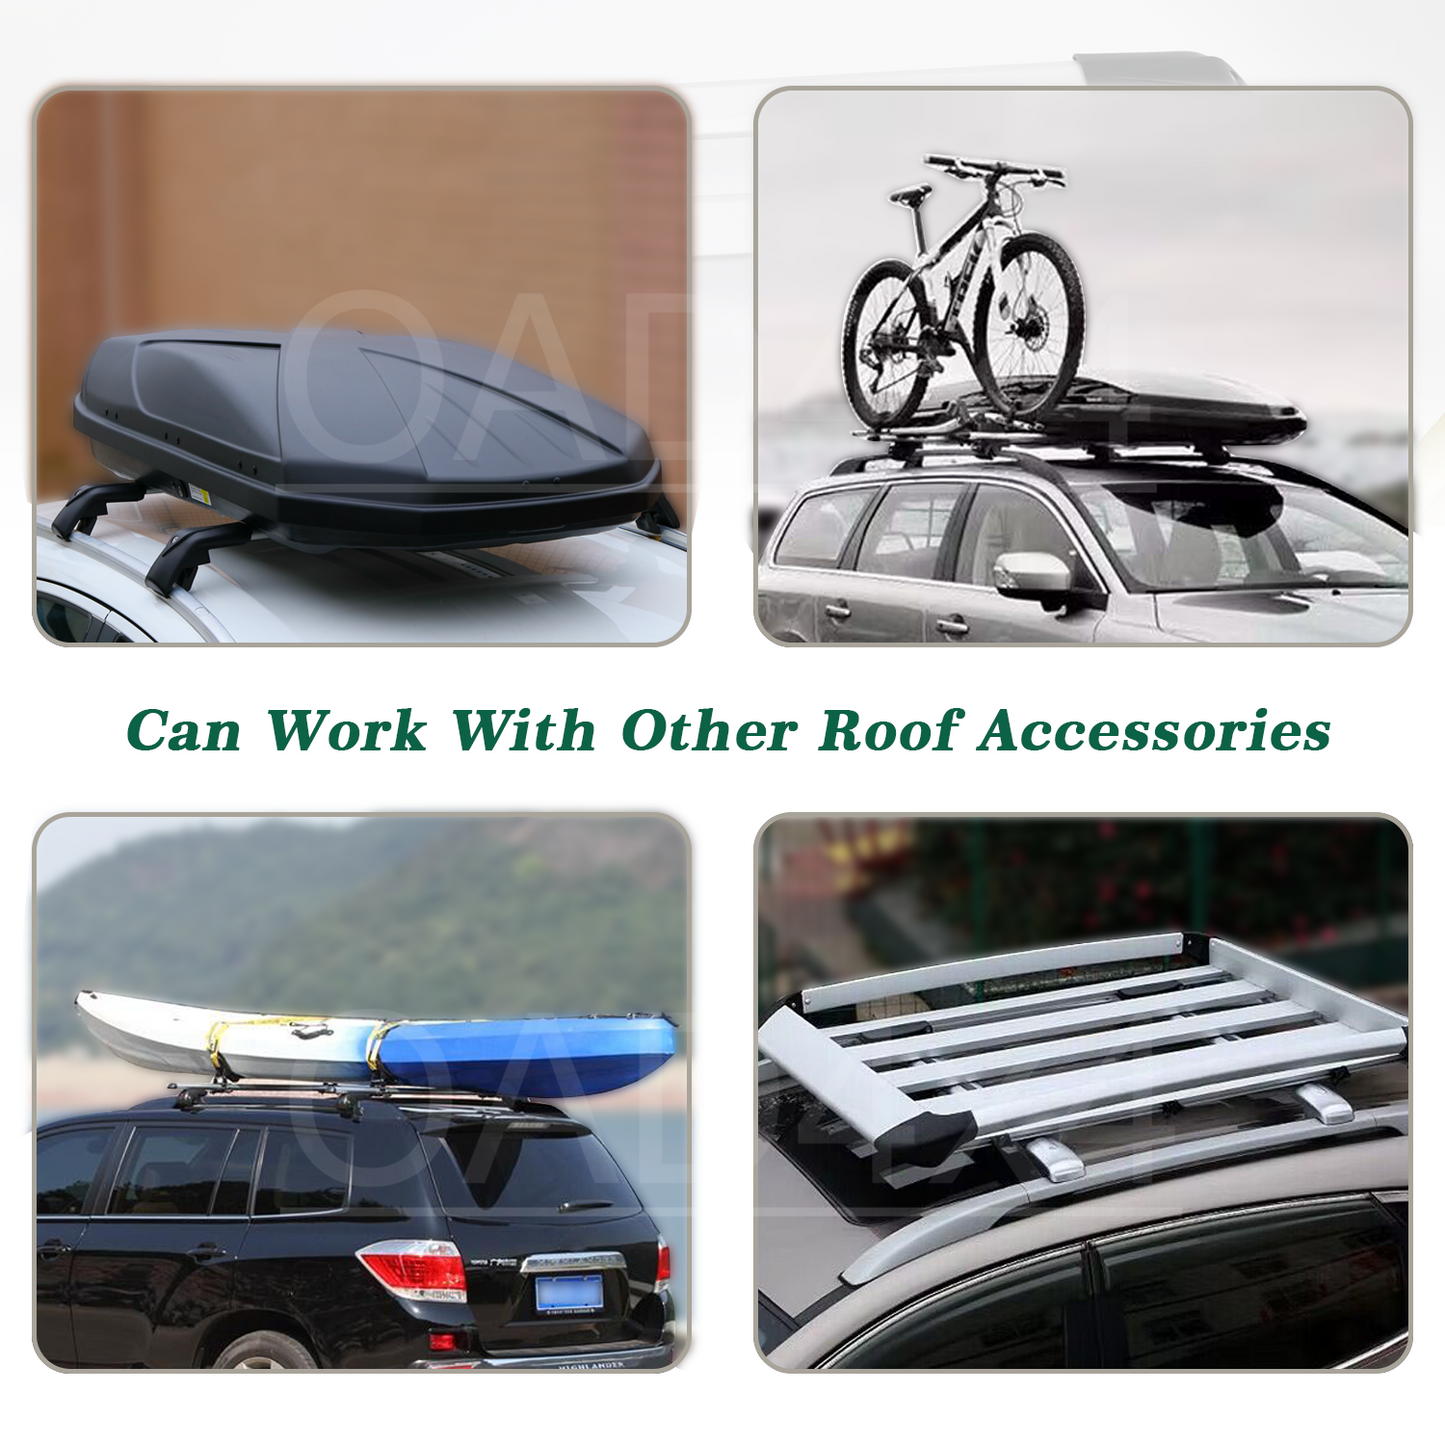 OAD 1 Pair Aluminum Silver Cross Bar Roof Racks Baggage holder for Ford Ranger dual cab 08-11 with raised roof rail